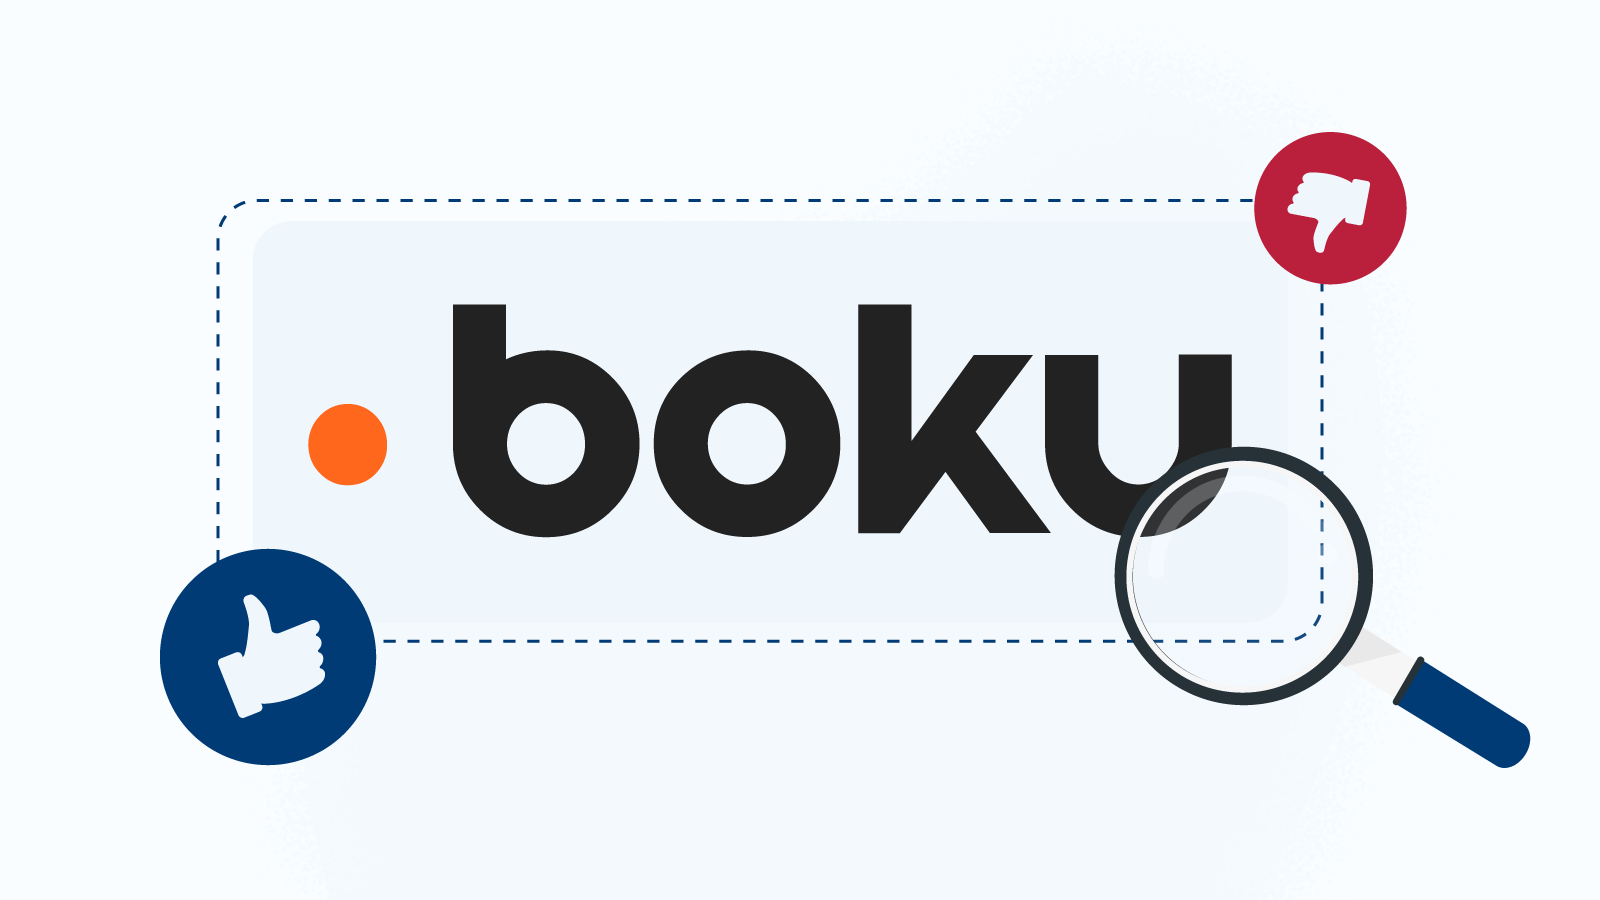 Payment method comparison – Pay by phone casino vs Boku